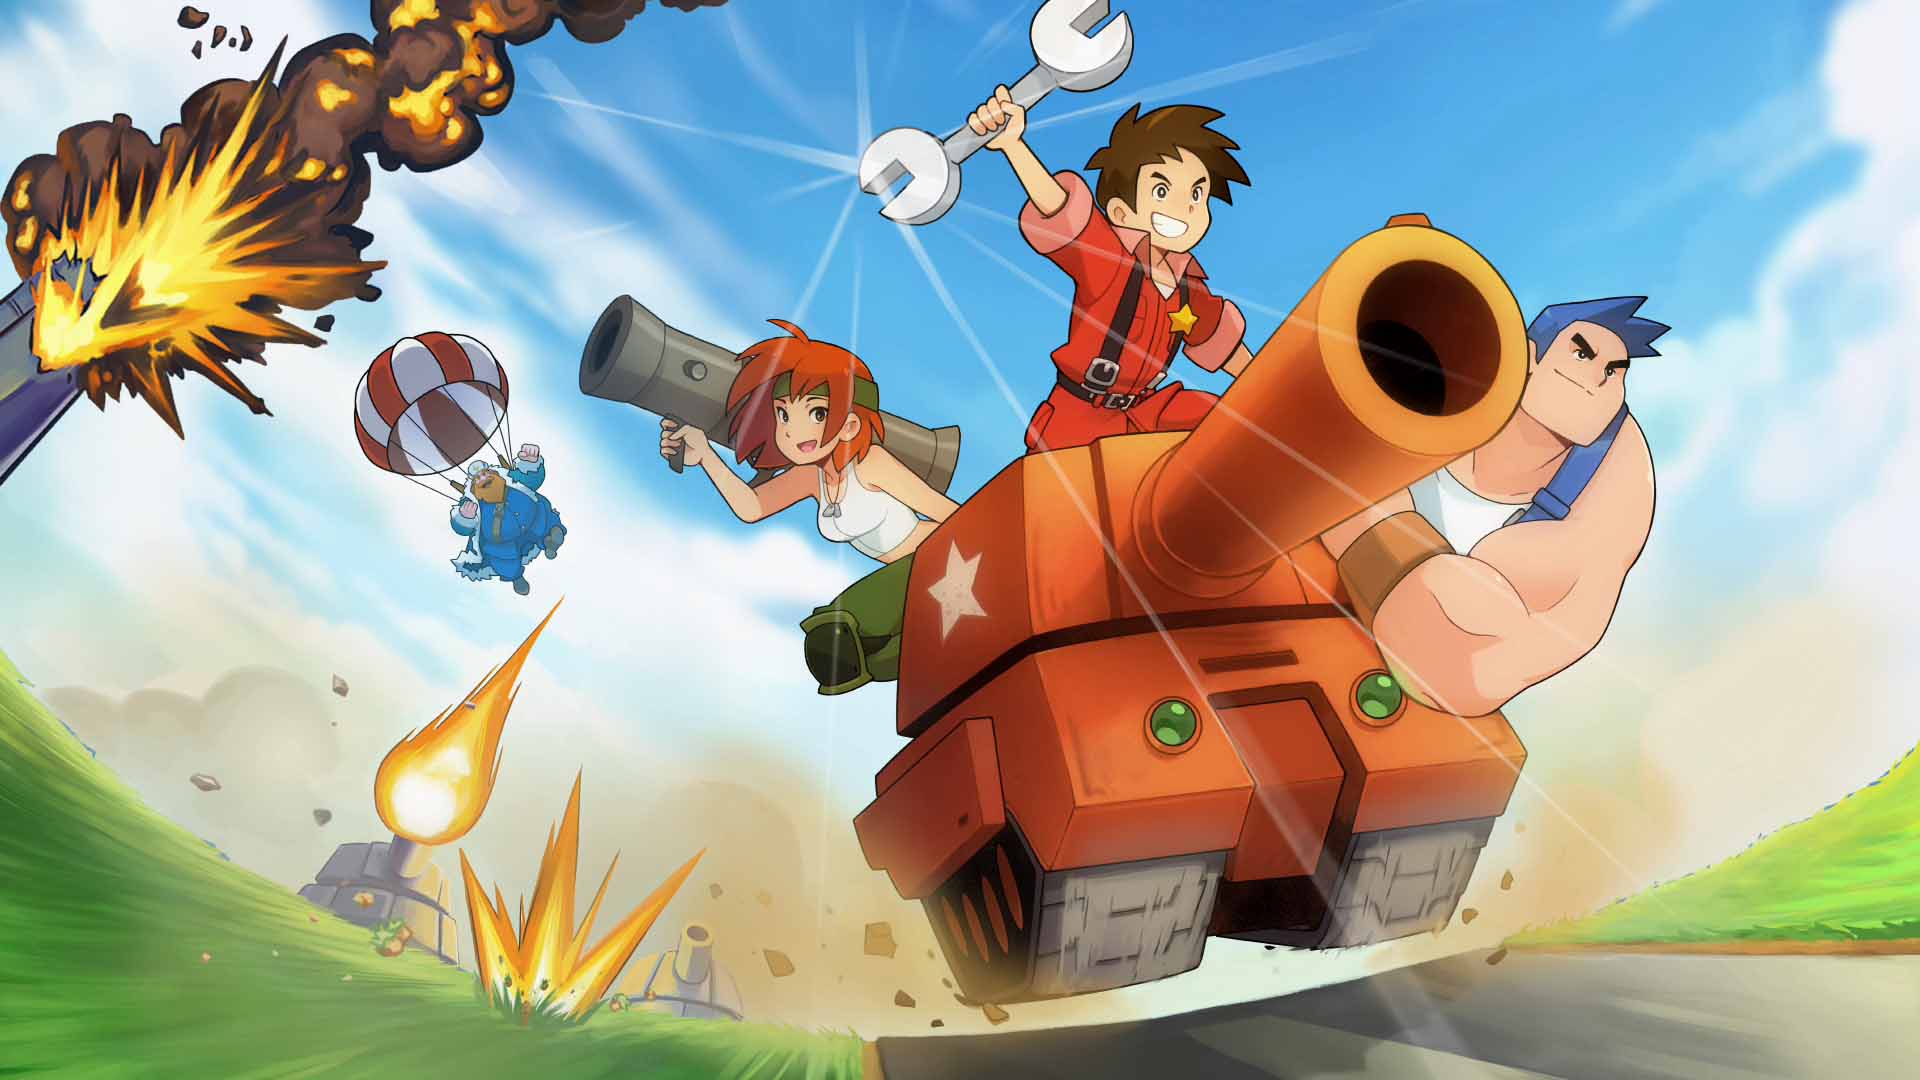 Want an Advance Wars PC game? Try these